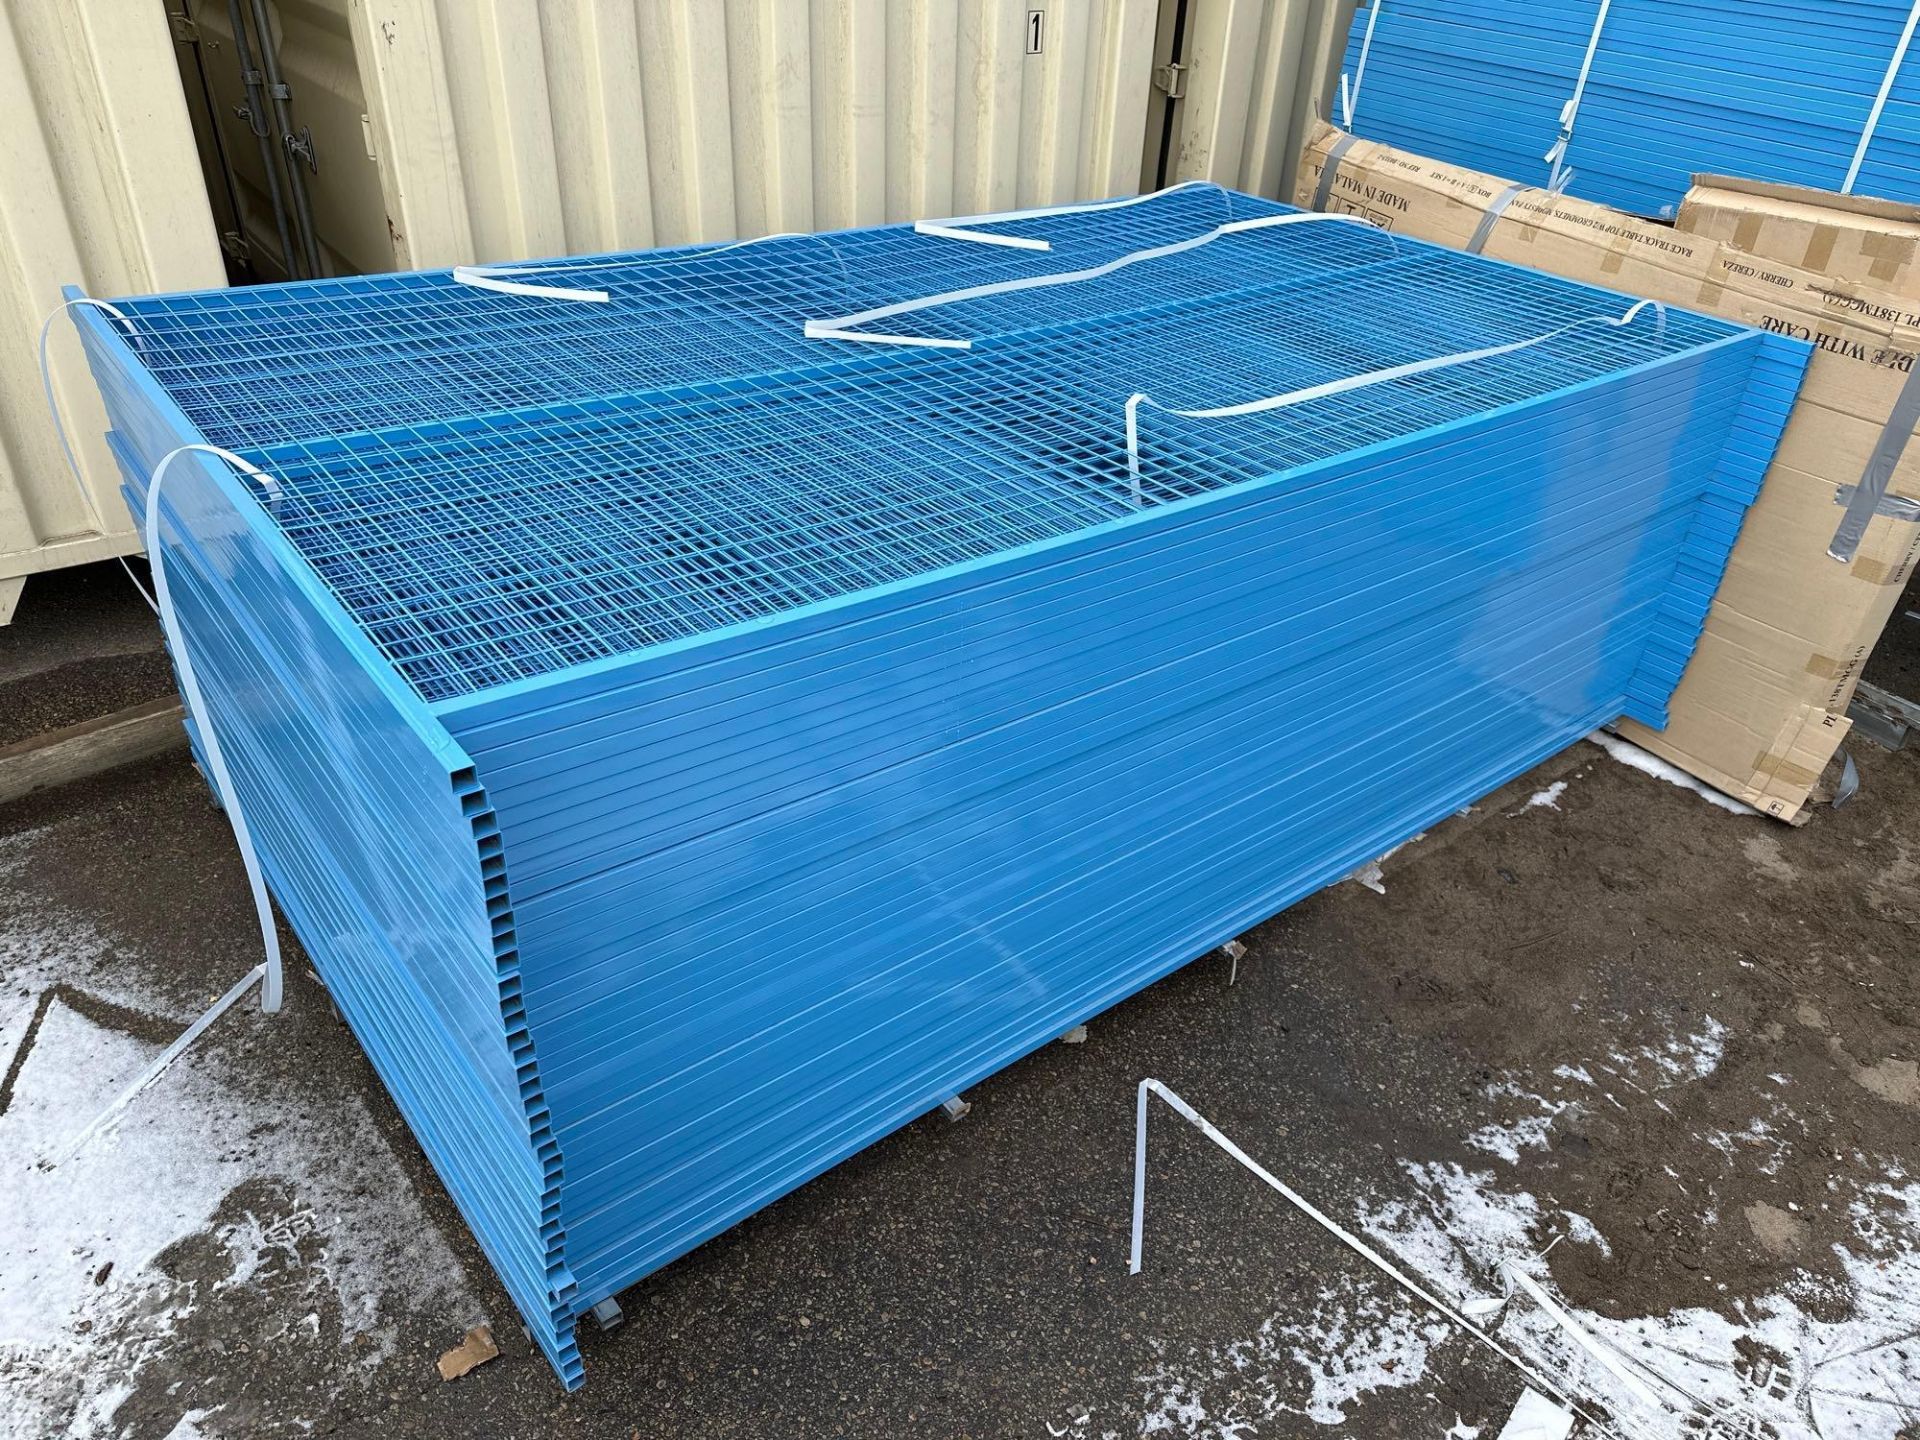 Lot of (45) 9-1/2”’X6’ Galvanized/Powder Coated Construction Fencing Panels w/ Top Clips and Bottoms - Image 2 of 3